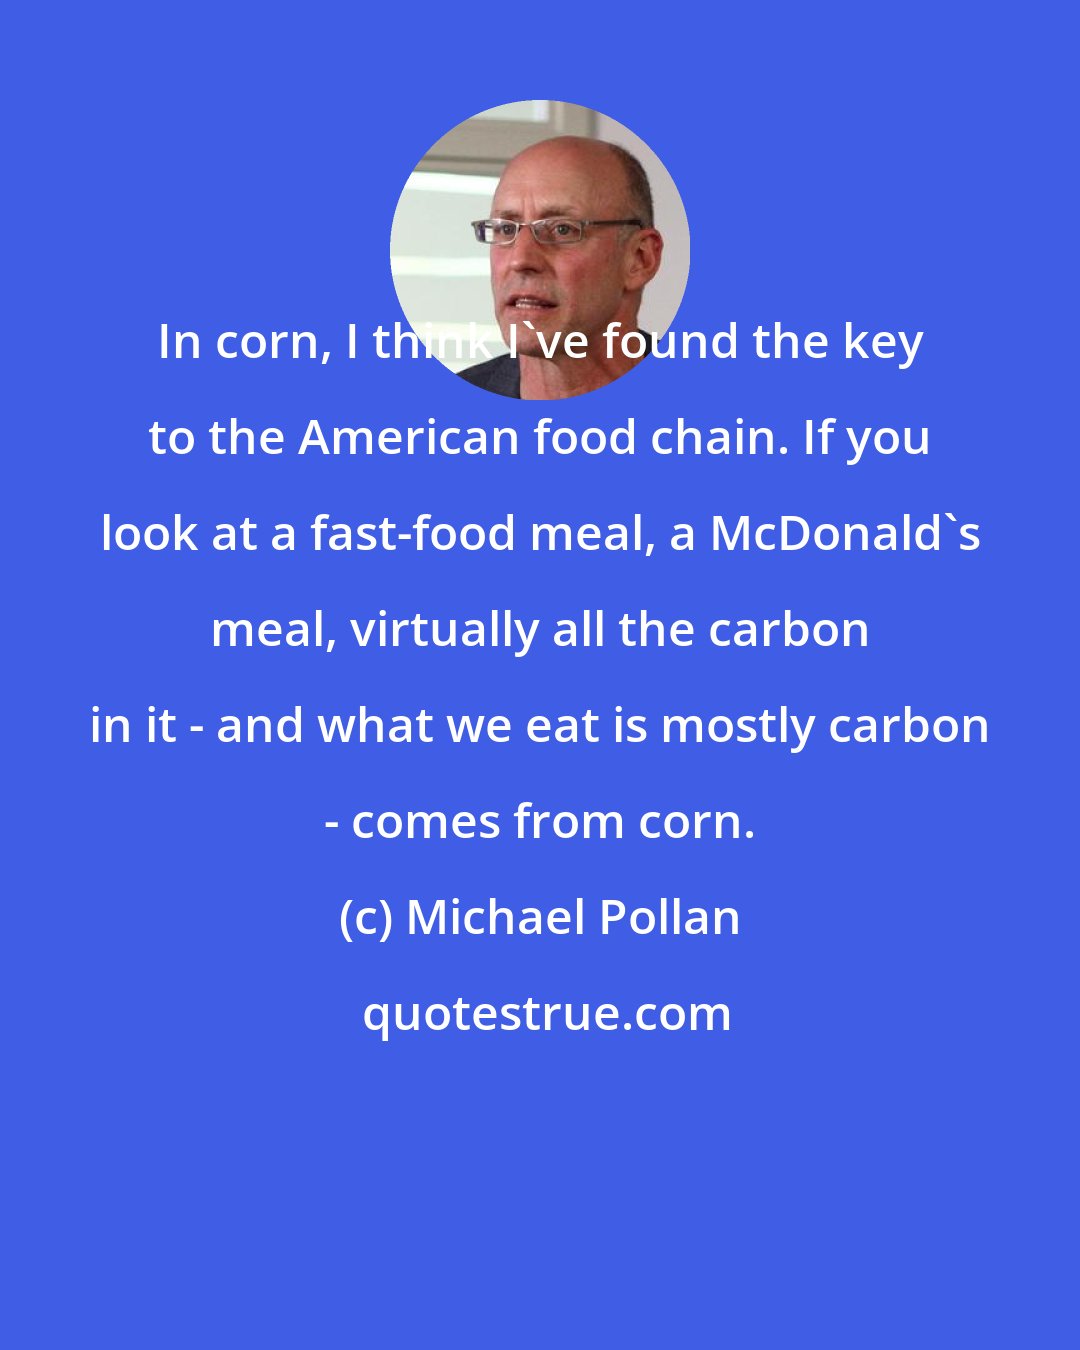 Michael Pollan: In corn, I think I've found the key to the American food chain. If you look at a fast-food meal, a McDonald's meal, virtually all the carbon in it - and what we eat is mostly carbon - comes from corn.